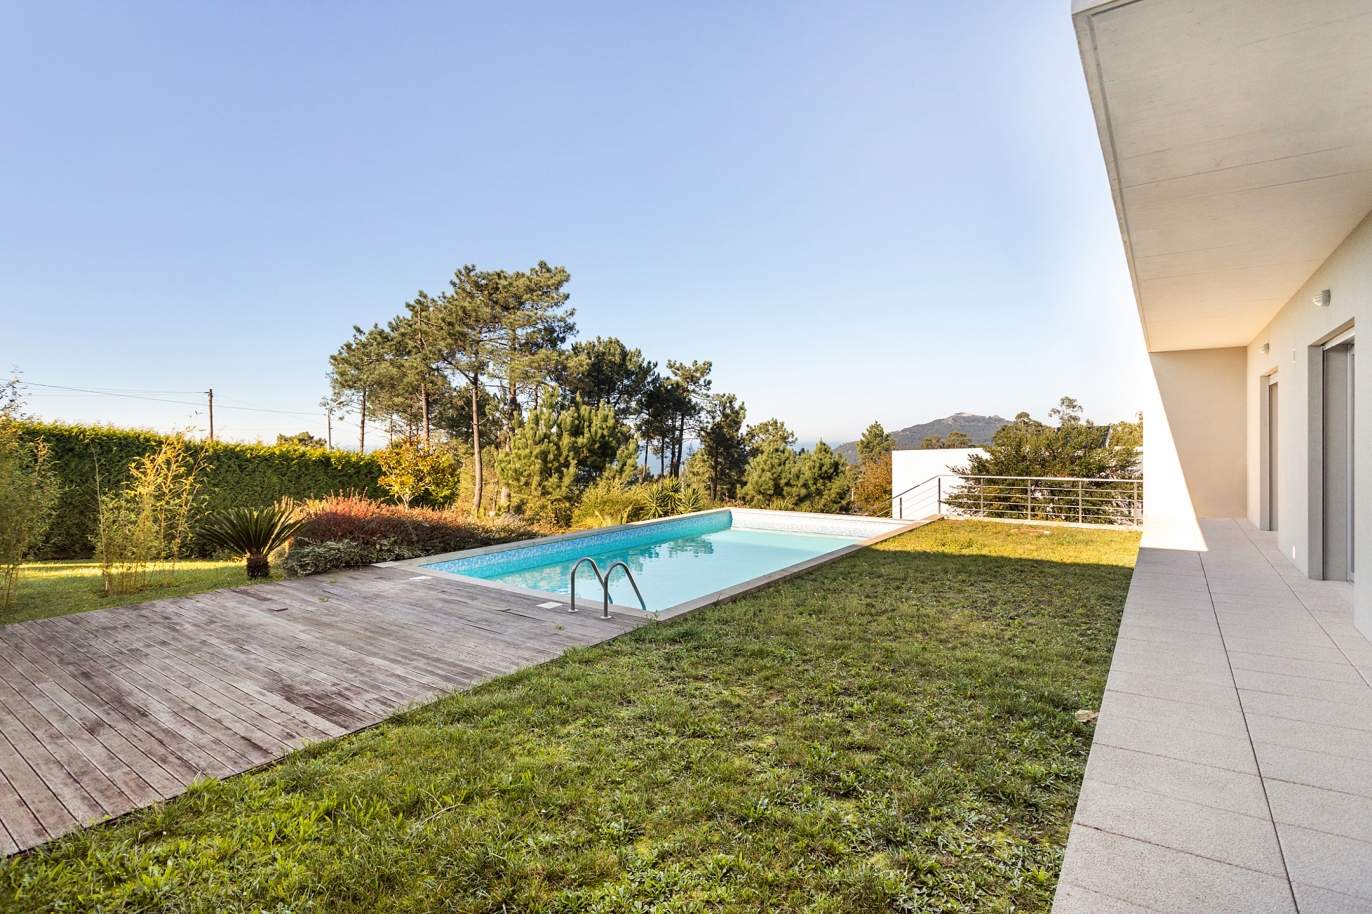 Villa for sale with panoramic views of the sea and the Minho River estuary, Caminha, North Portugal_185089